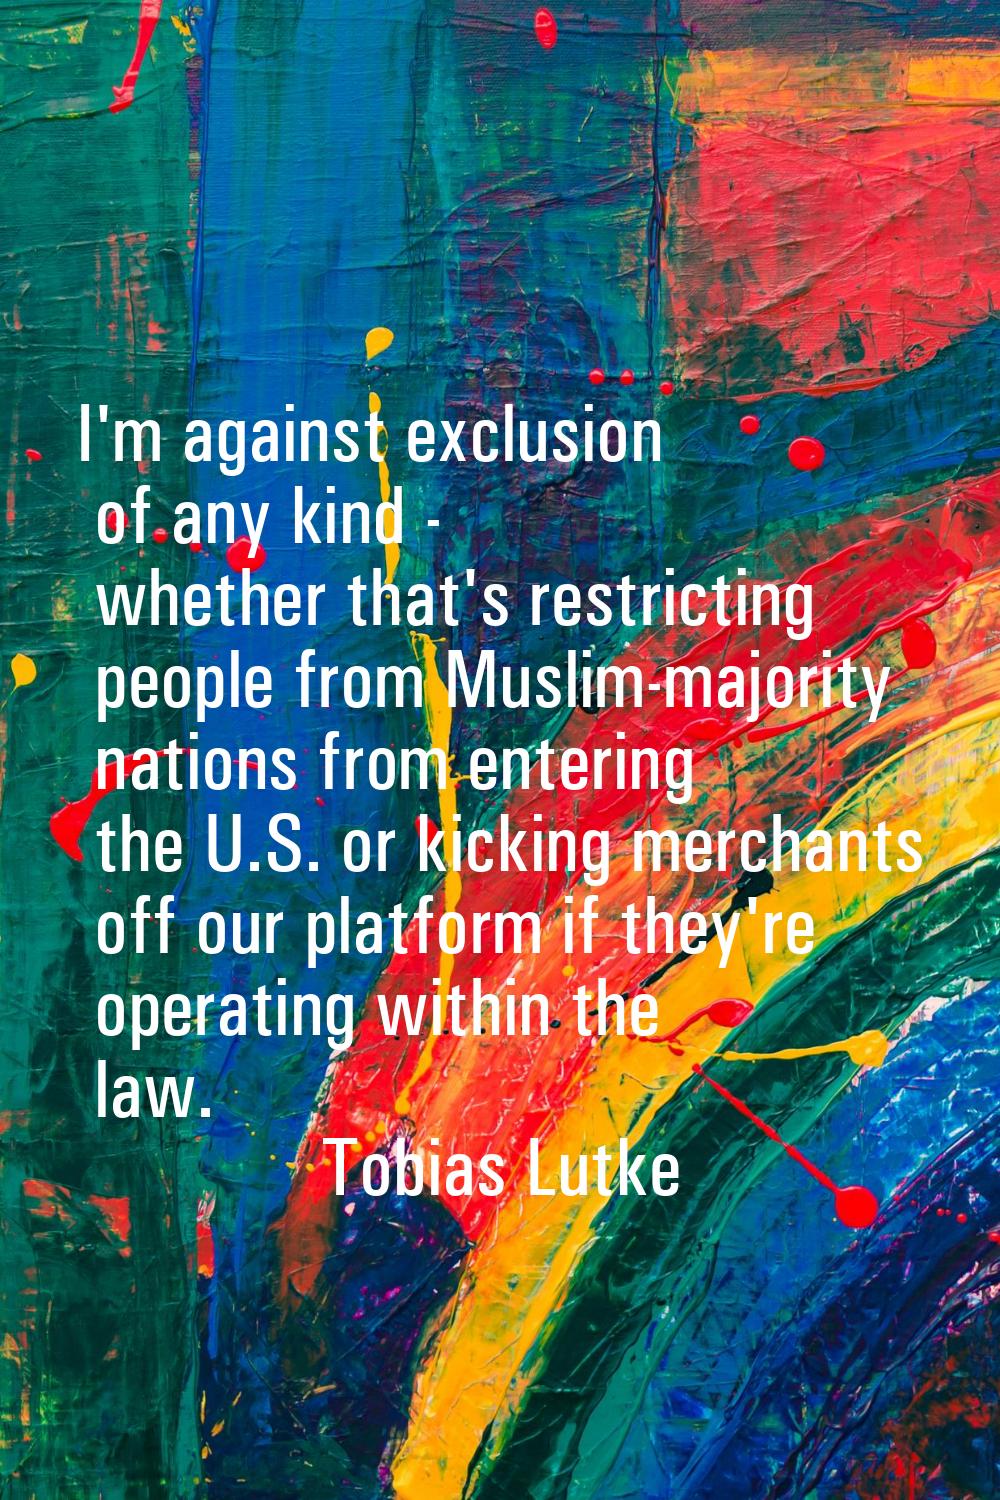 I'm against exclusion of any kind - whether that's restricting people from Muslim-majority nations 